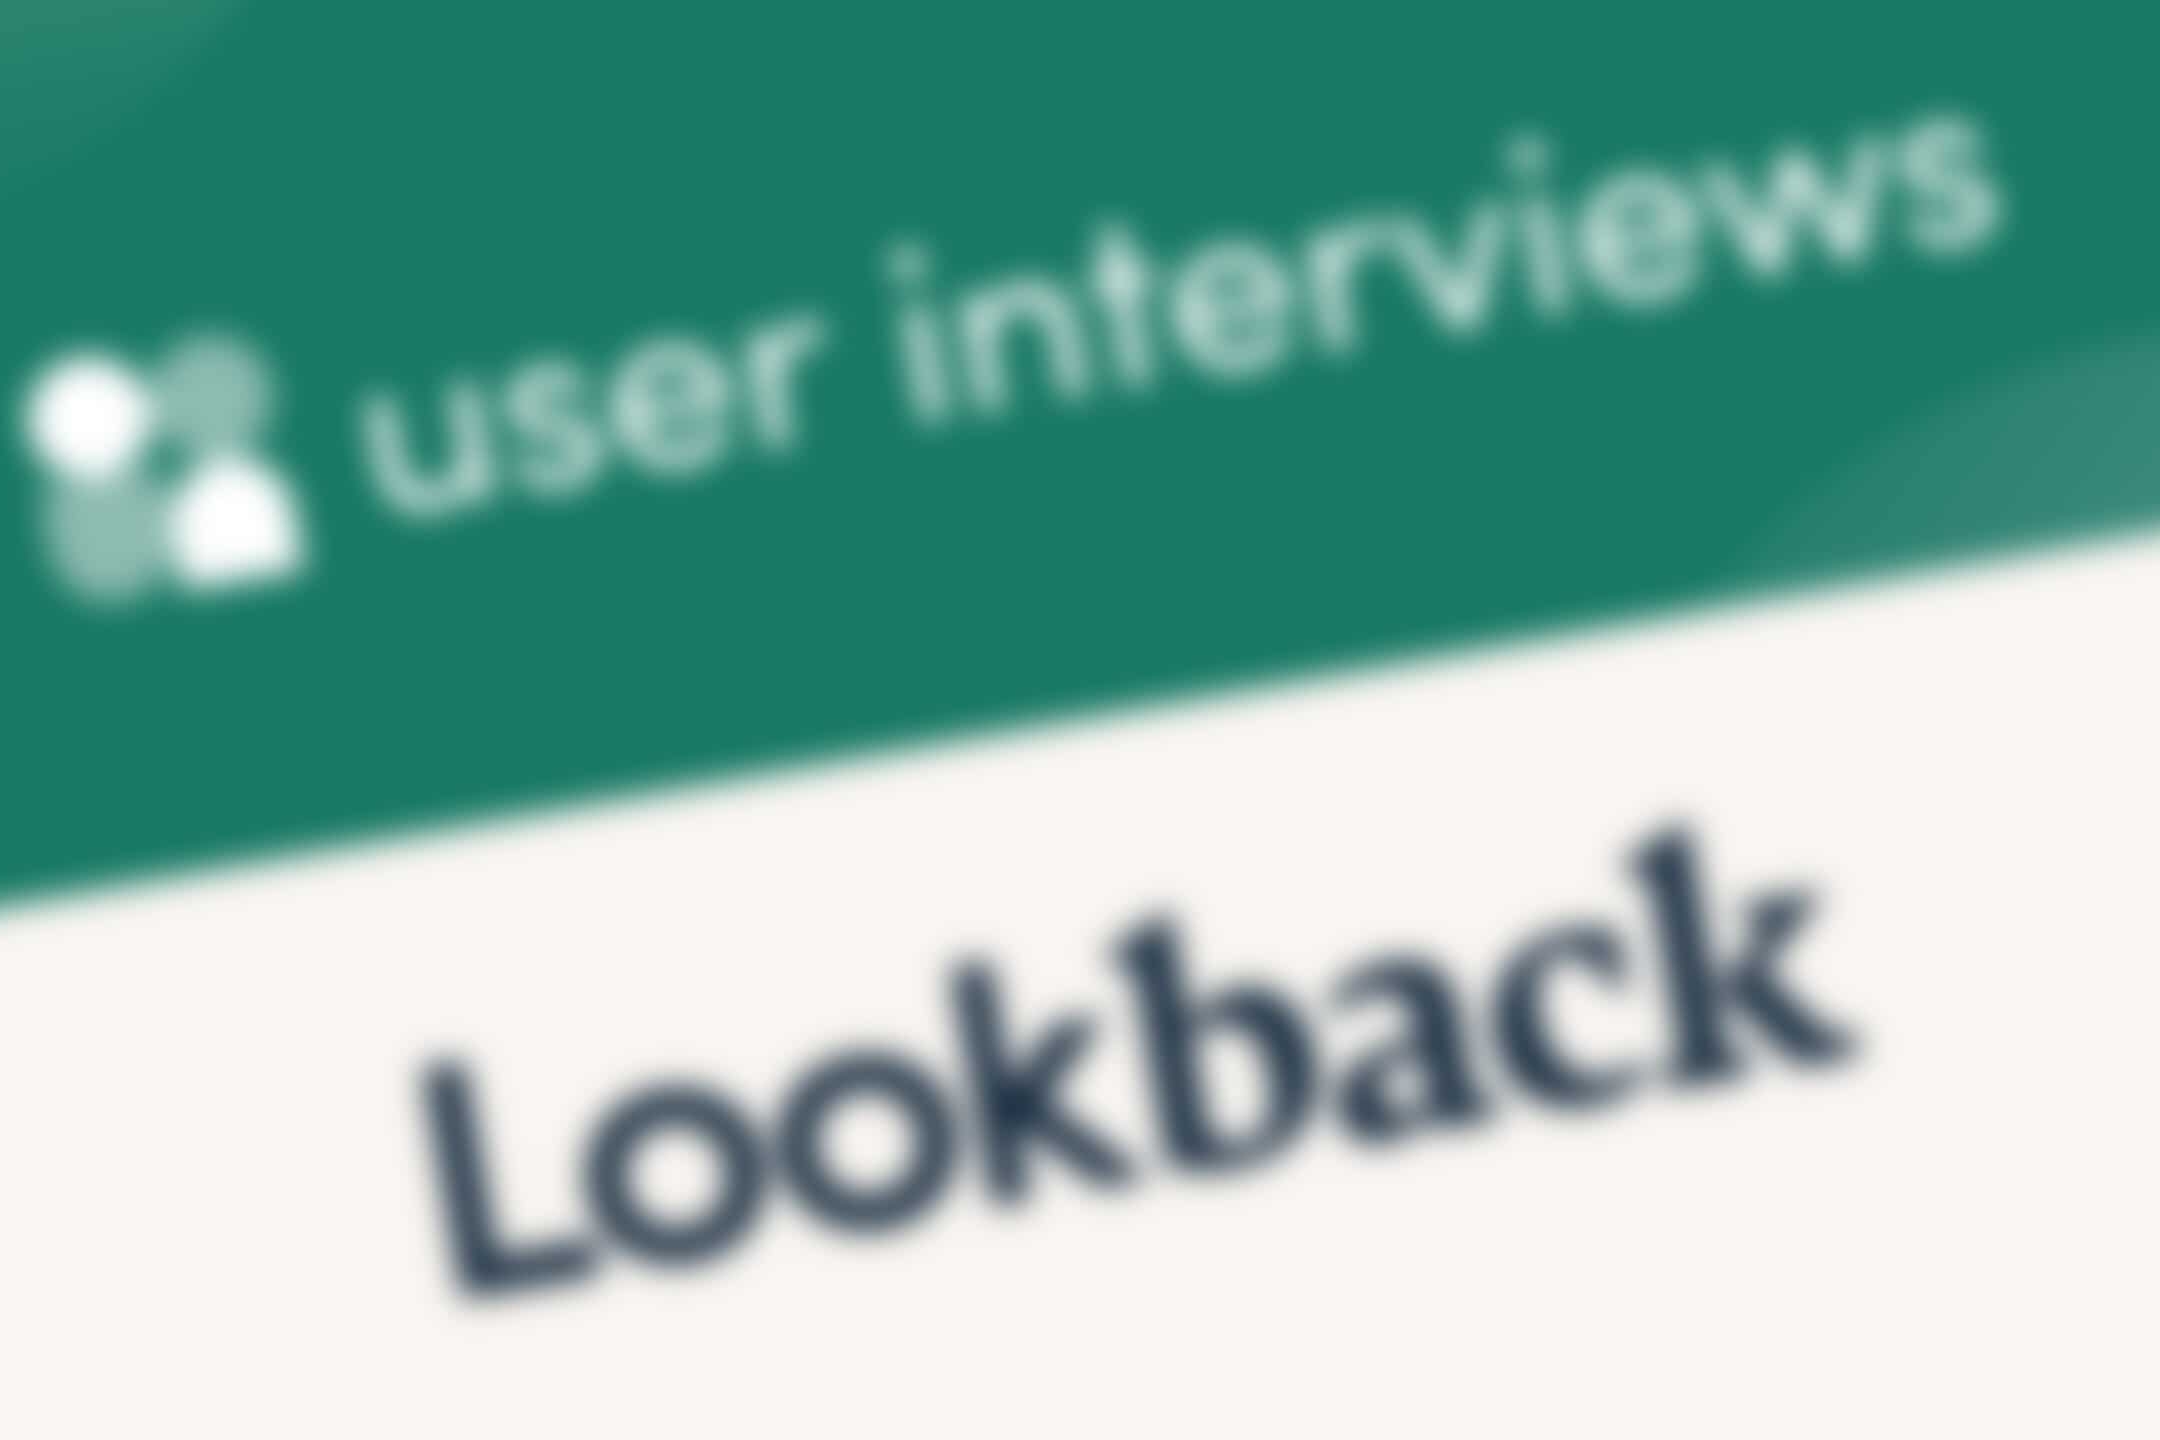 User Interviews and LoopBack.io logs inclined and blurred